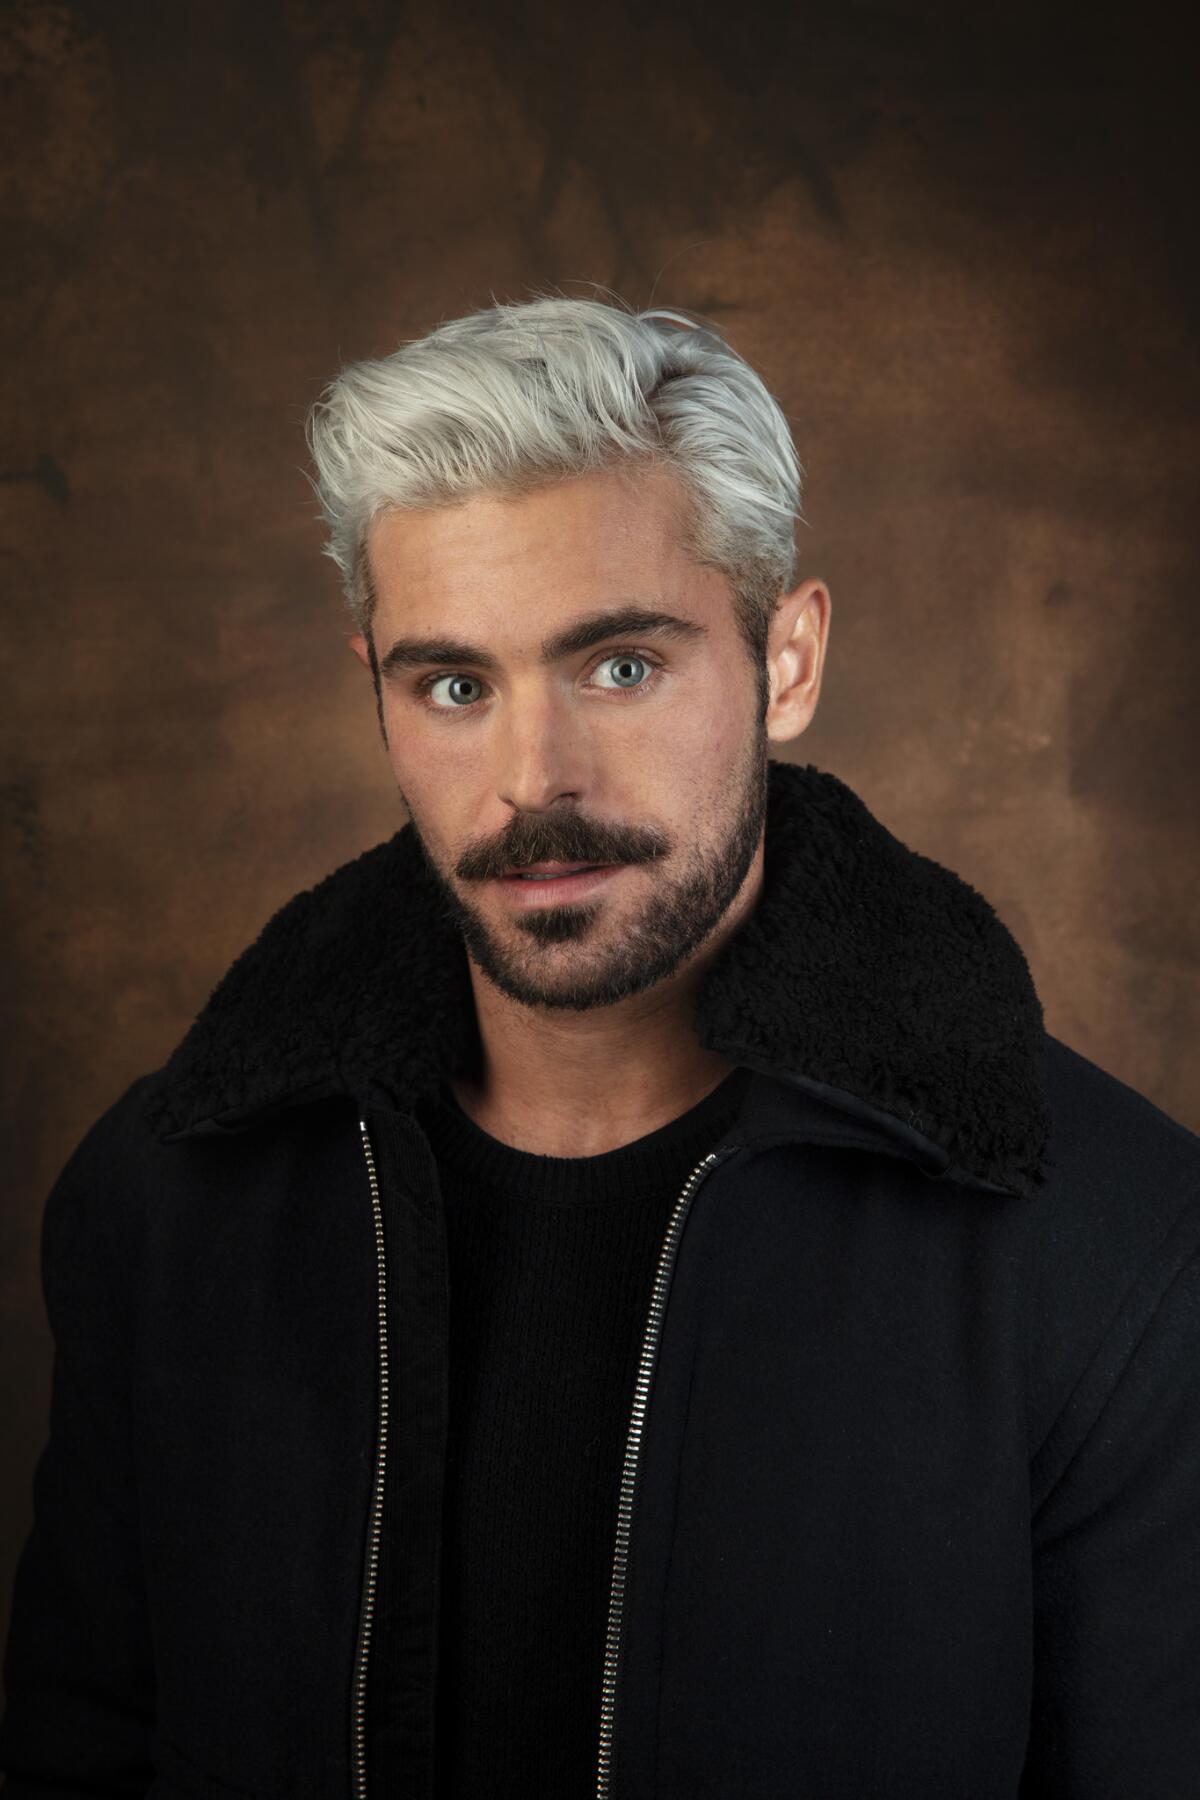 Actor Zac Efron at the L.A. Times Photo and Video Studio at the 2019 Sundance Film Festival